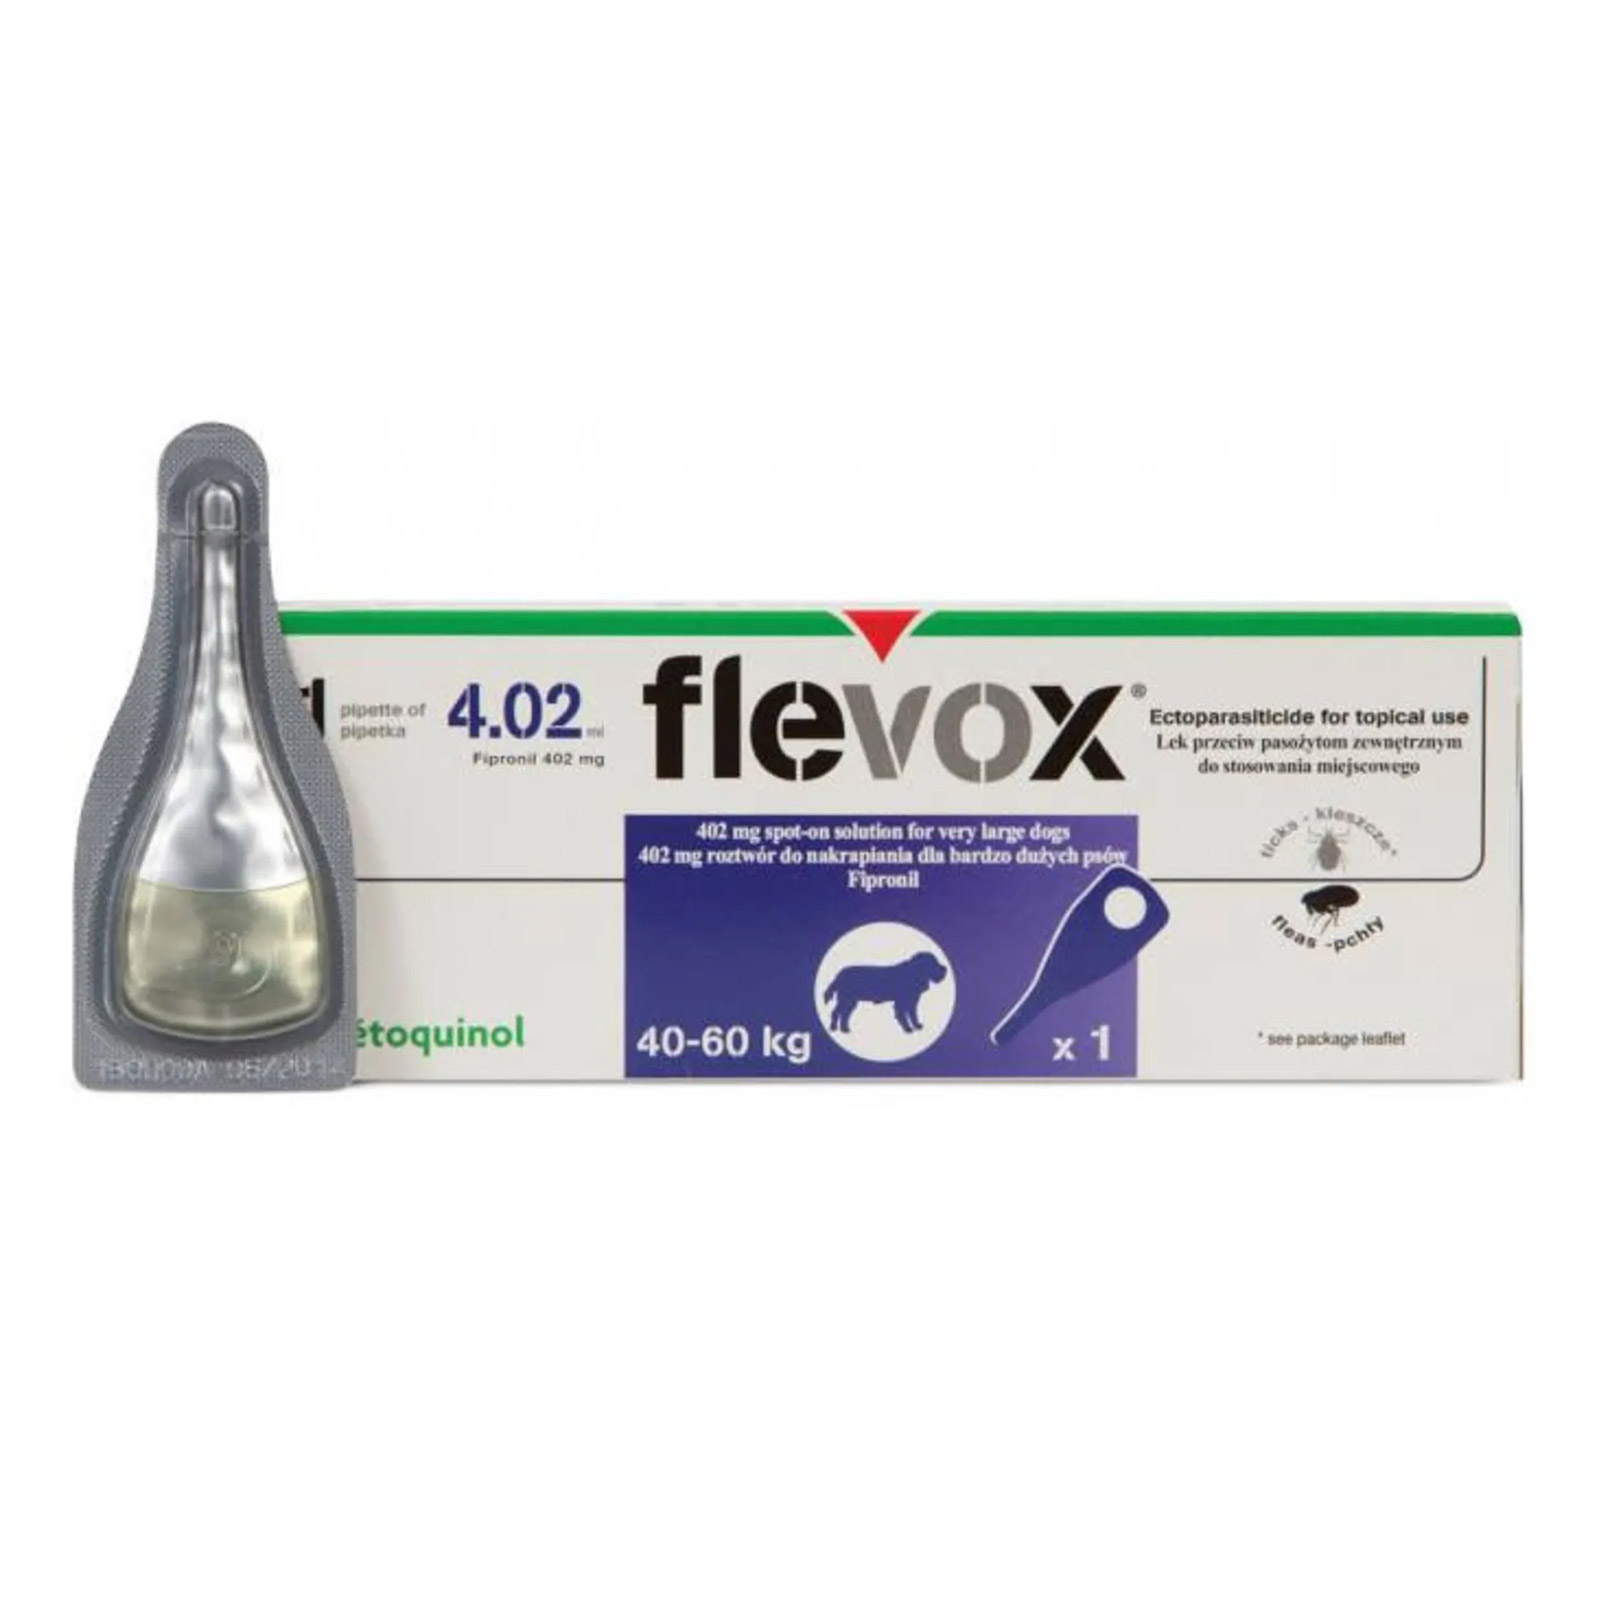 Flevox for Dogs is a rapid and effective treatment for dogs to get rid of fleas and ticks. Flevox Spot-On for Dogs comes in an easy to use spot-on solution which protects agains nasty parasites.